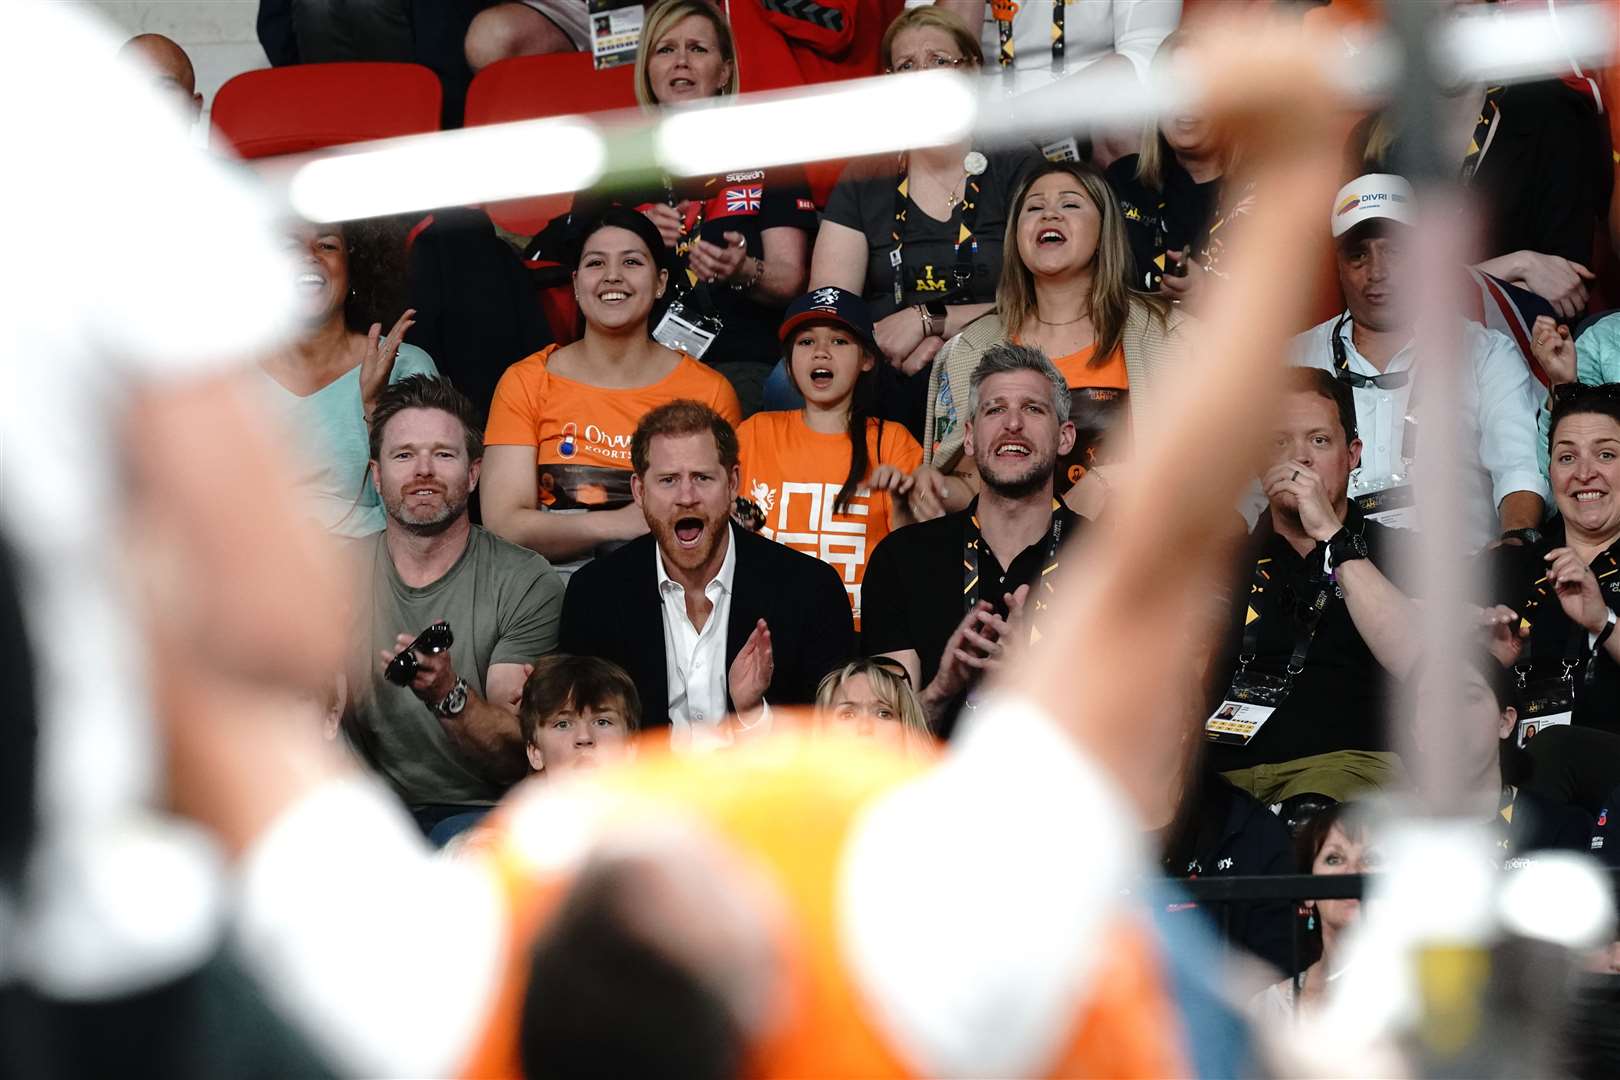 The Duke of Sussex cheers on competitors during the Powerlifting event at the Invictus Games 2022 (Aaron Chown/PA)